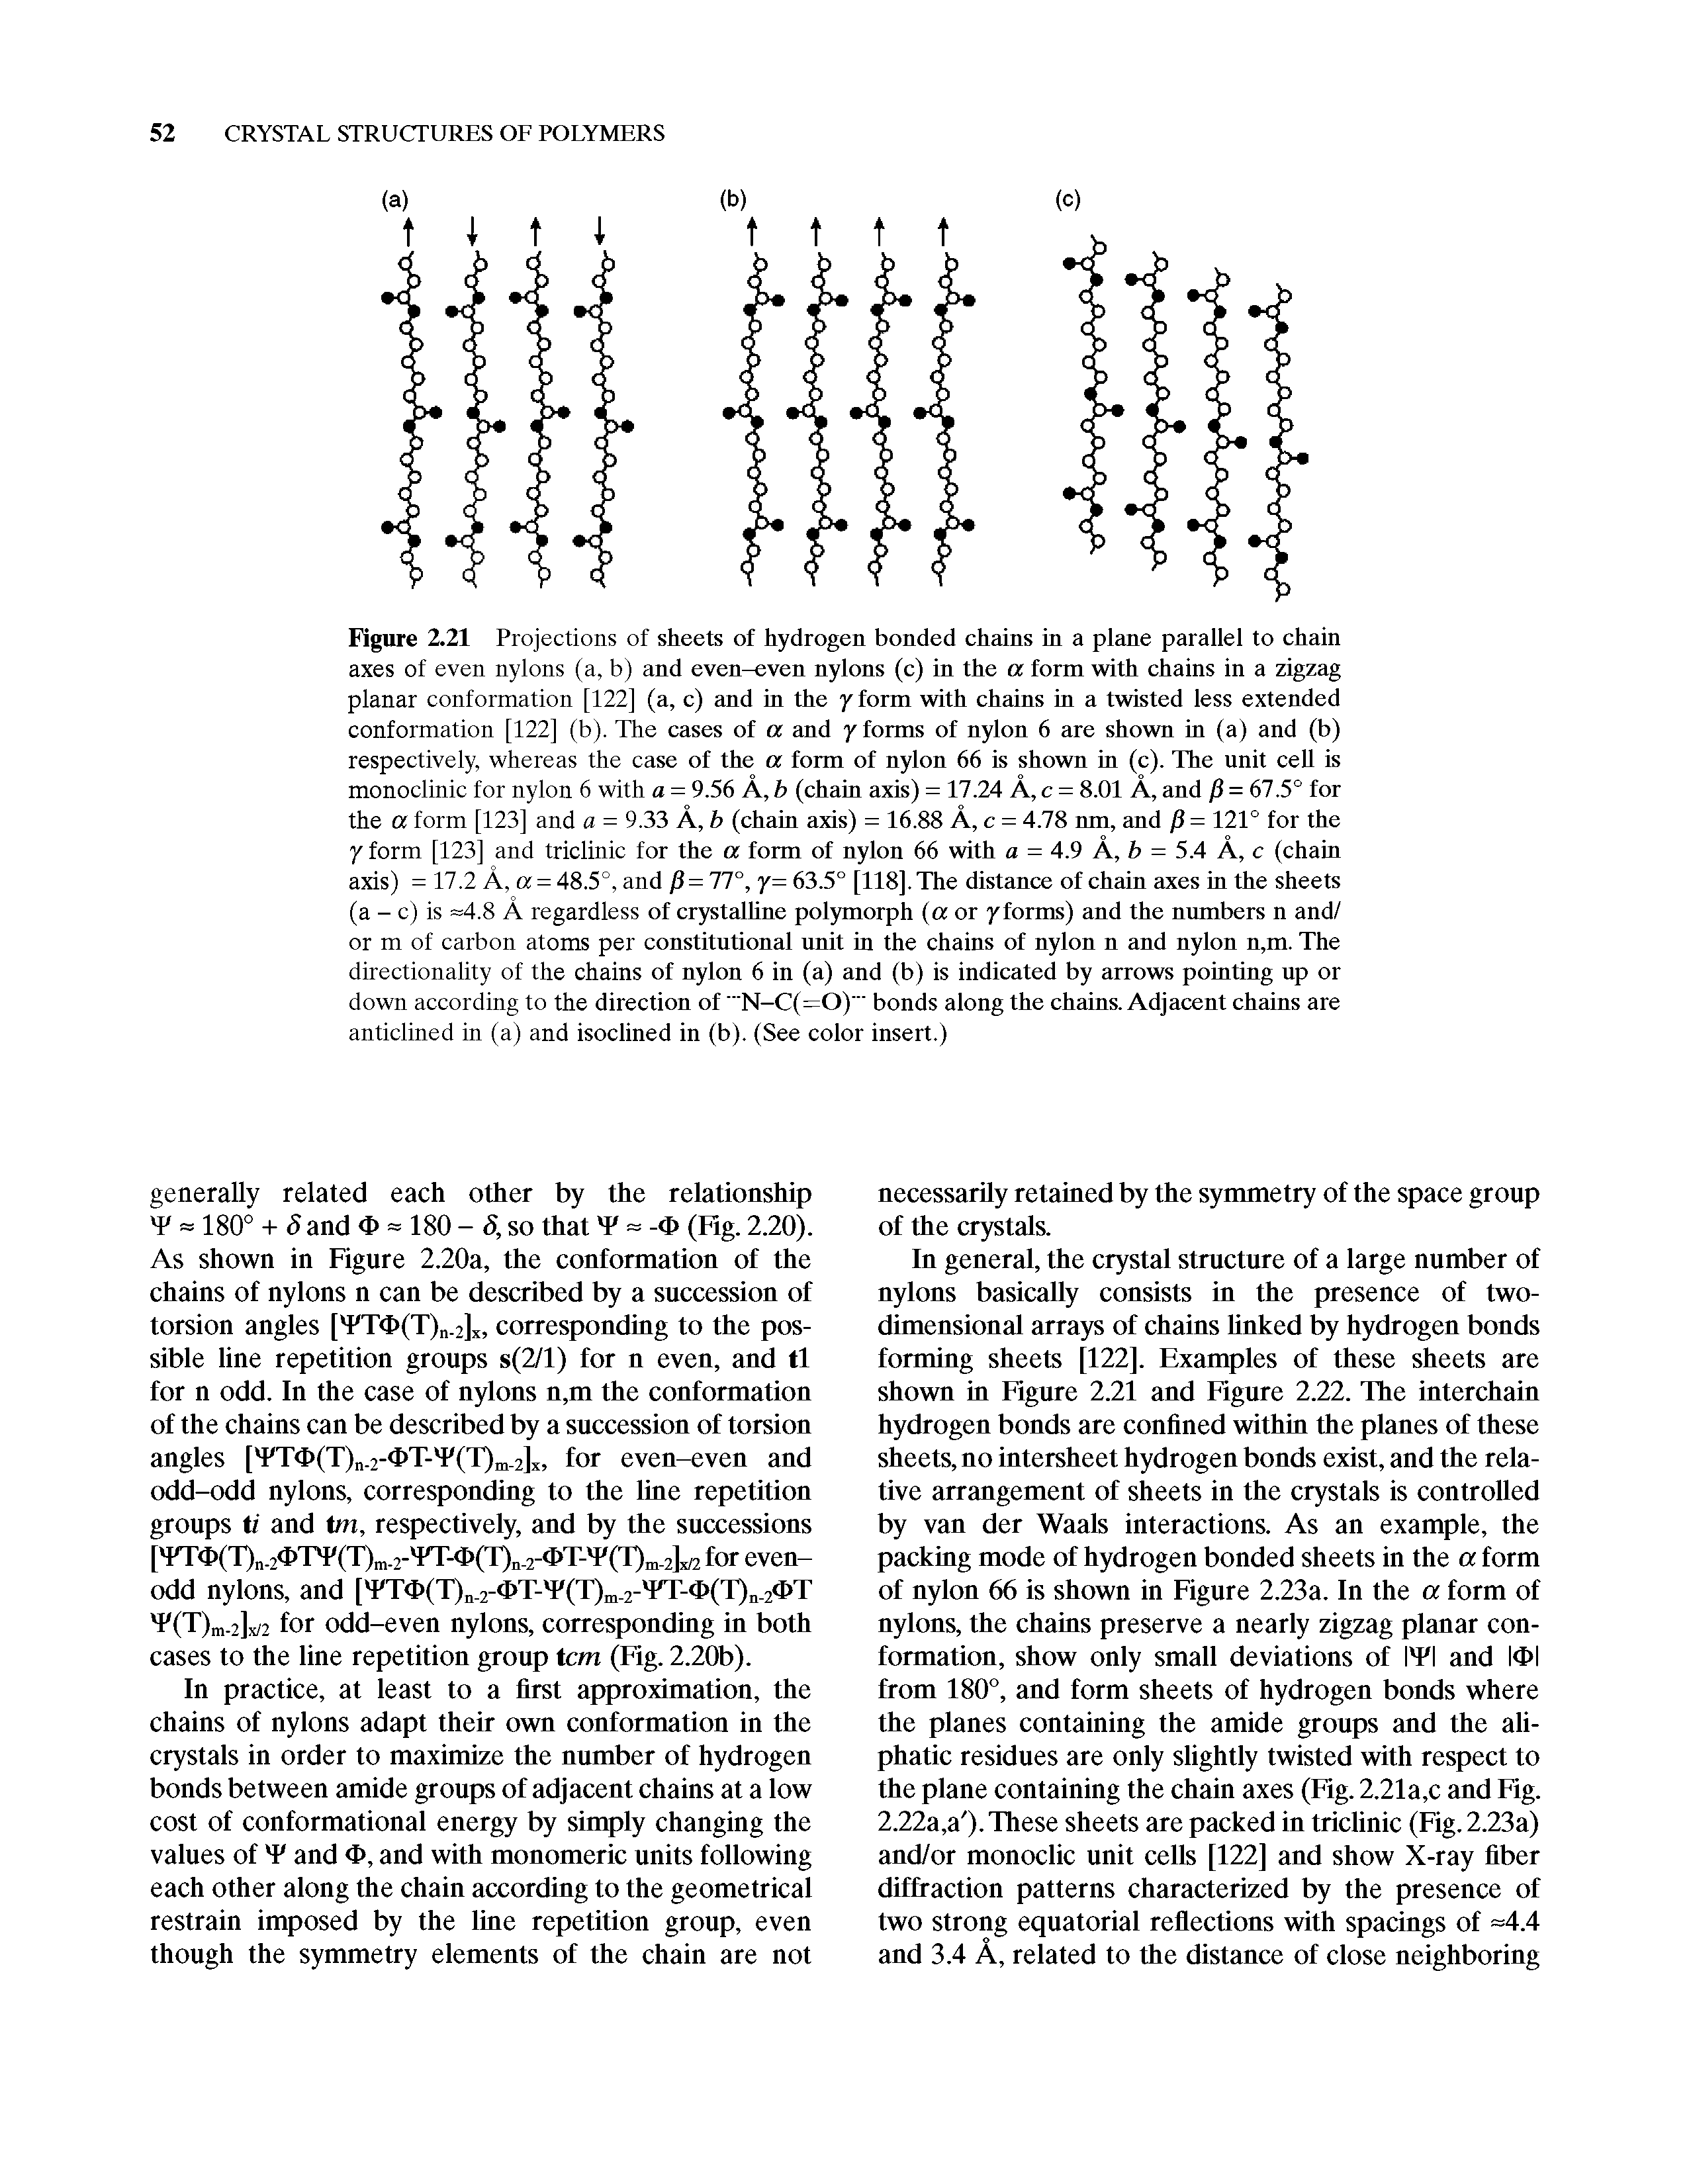 Figure 2.21 Projections of sheets of hydrogen bonded chains in a plane parallel to chain axes of even nylons (a, b) and even-even nylons (c) in the a form with chains in a zigzag planar conformation [122] (a, c) and in the y form with chains in a twisted less extended conformation [122] (b). The cases of a and /forms of nylon 6 are shown in (a) and (b) respectively, whereas the case of the a form of nylon 66 is shown in (c). The unit cell is monoclinic for nylon 6 with a = 9.56 A, b (chain axis) = 17.24 A, c = 8.01 A, and p = 67.5° for the a form [123] and a = 9.33 A, b (chain axis) = 16.88 A, c = 4.78 nm, and P = 121° for the Y form [123] and triclinic for the a form of nylon 66 with a = 4.9 A, = 5.4 A, c (chain axis) = 17.2 A, a = 48.5°, and p = 77°, /= 63.5° [118]. The distance of chain axes in the sheets (a - c) is =4.8 A regardless of crystalhne polymorph (a or /forms) and the numbers n and/ or m of carbon atoms per constitutional unit in the chains of nylon n and nylon n,m. The directionality of the chains of nylon 6 in (a) and (b) is indicated by arrows pointing up or down according to the direction of N-C(=0) bonds along the chains. Adjacent chains are anticlined in (a) and isoclined in (b). (See color insert.)...